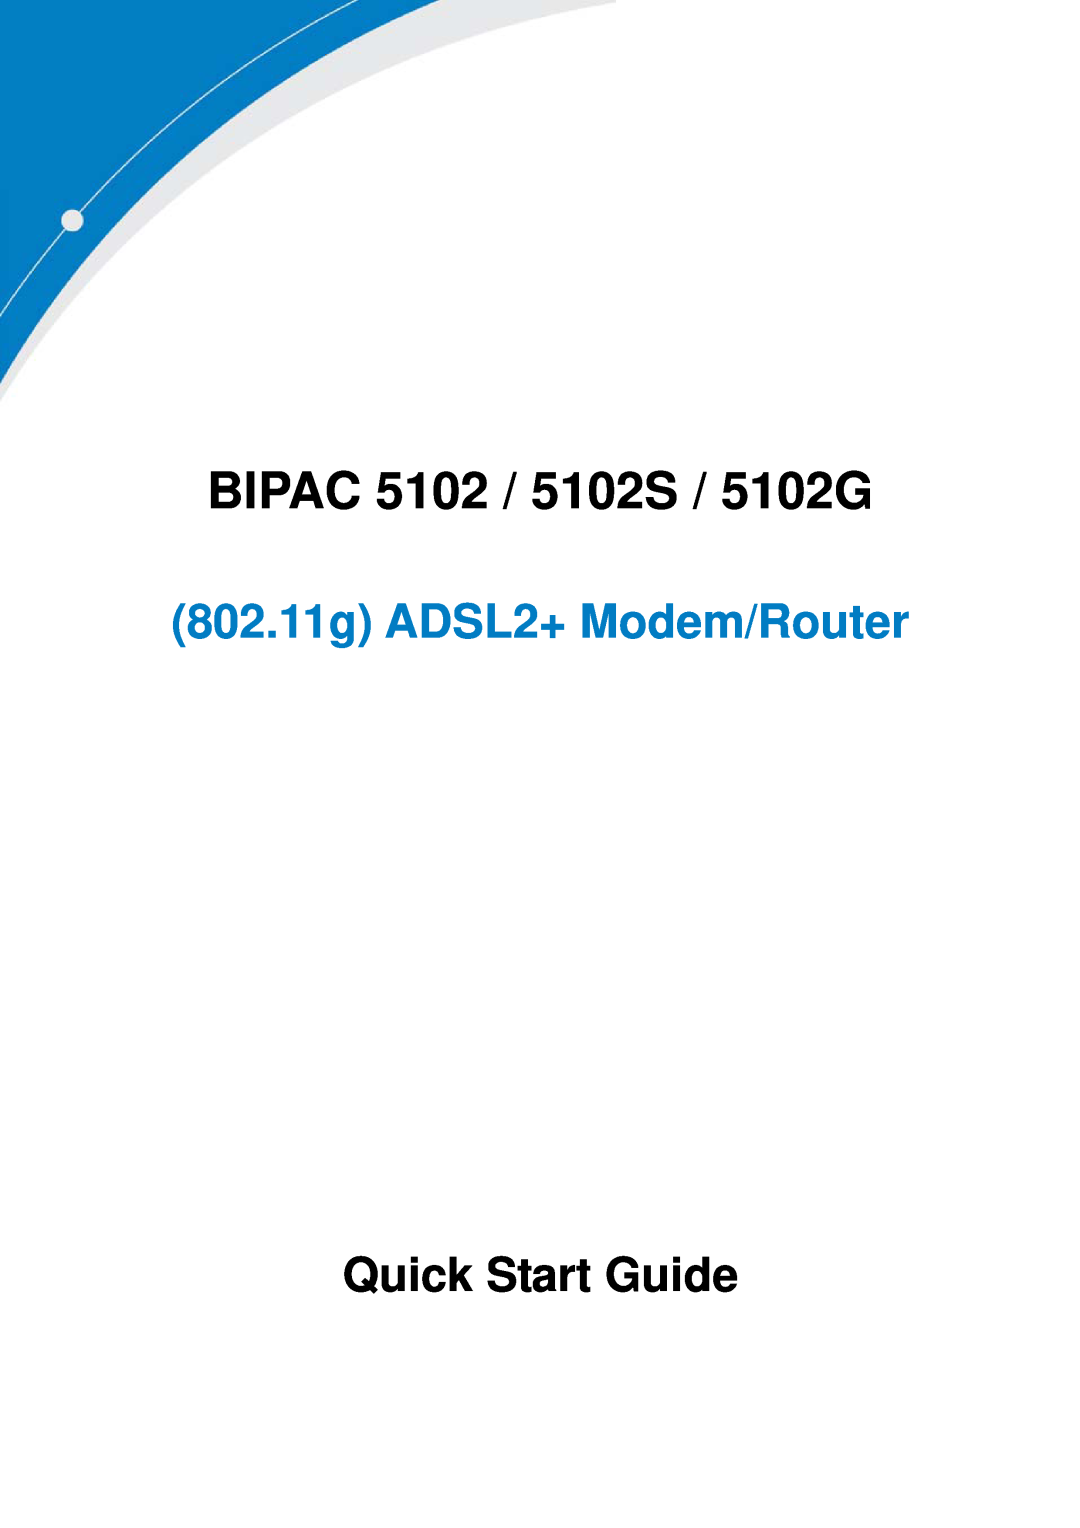 Billion Electric Company quick start BIPAC 5102 / 5102S / 5102G, 802.11g ADSL2+ Modem/Router, Quick Start Guide 